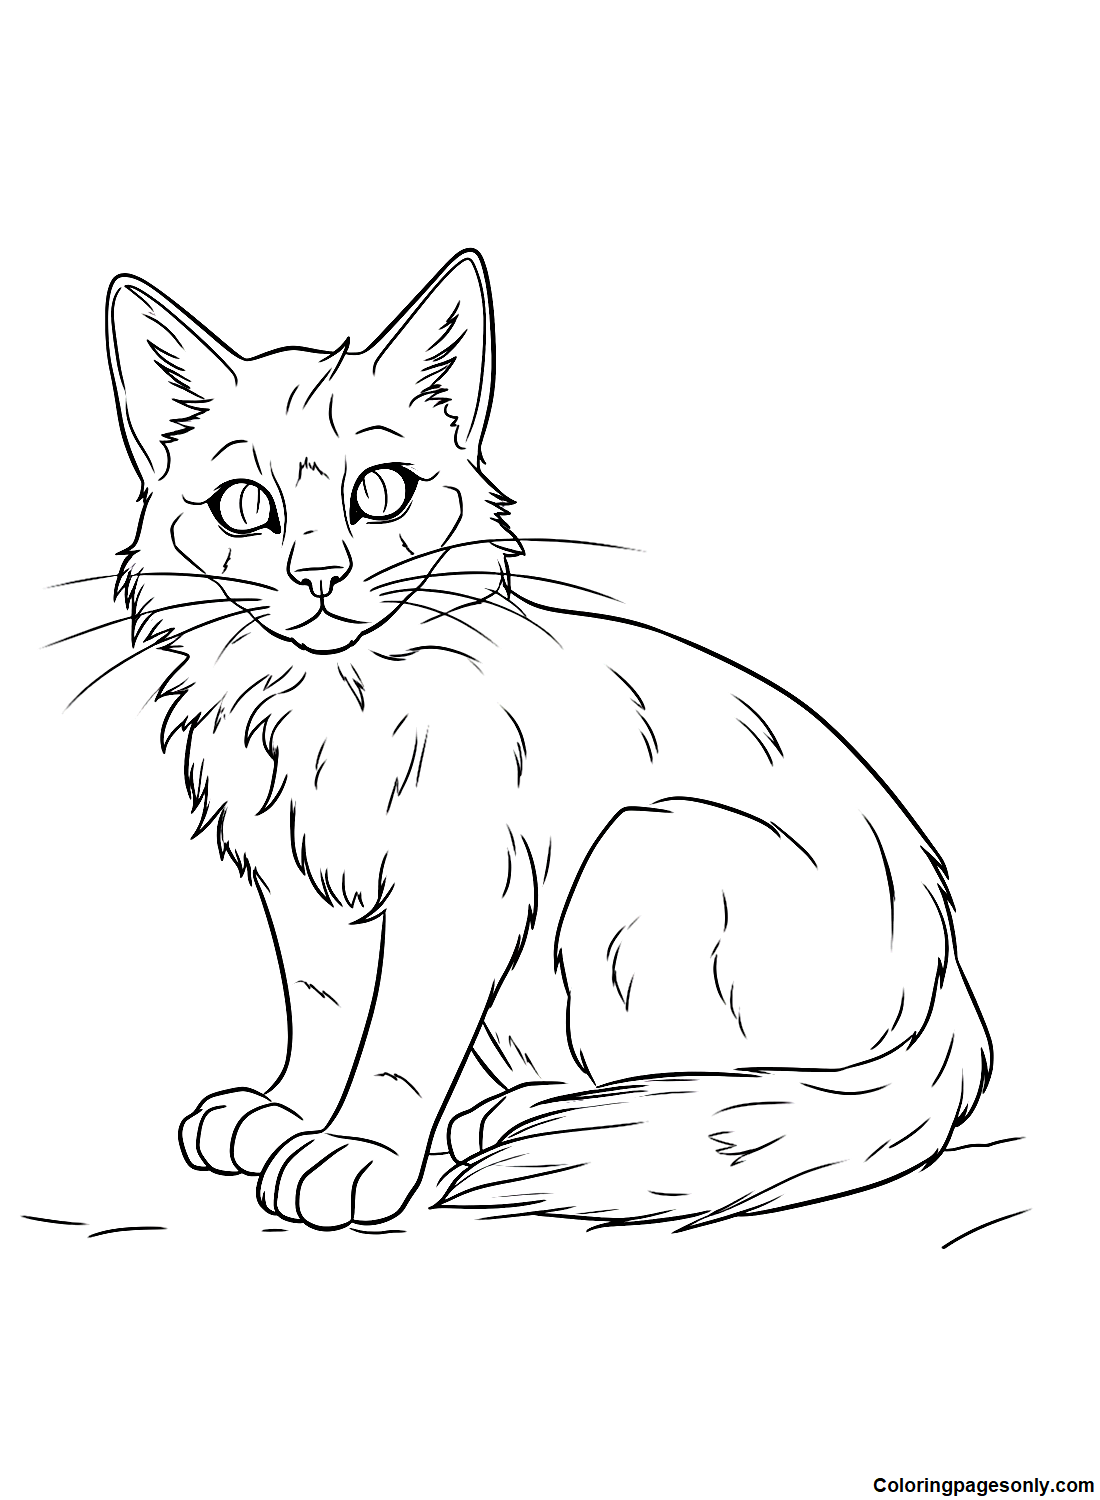 Squirrelflight from Warrior Cats Coloring Pages